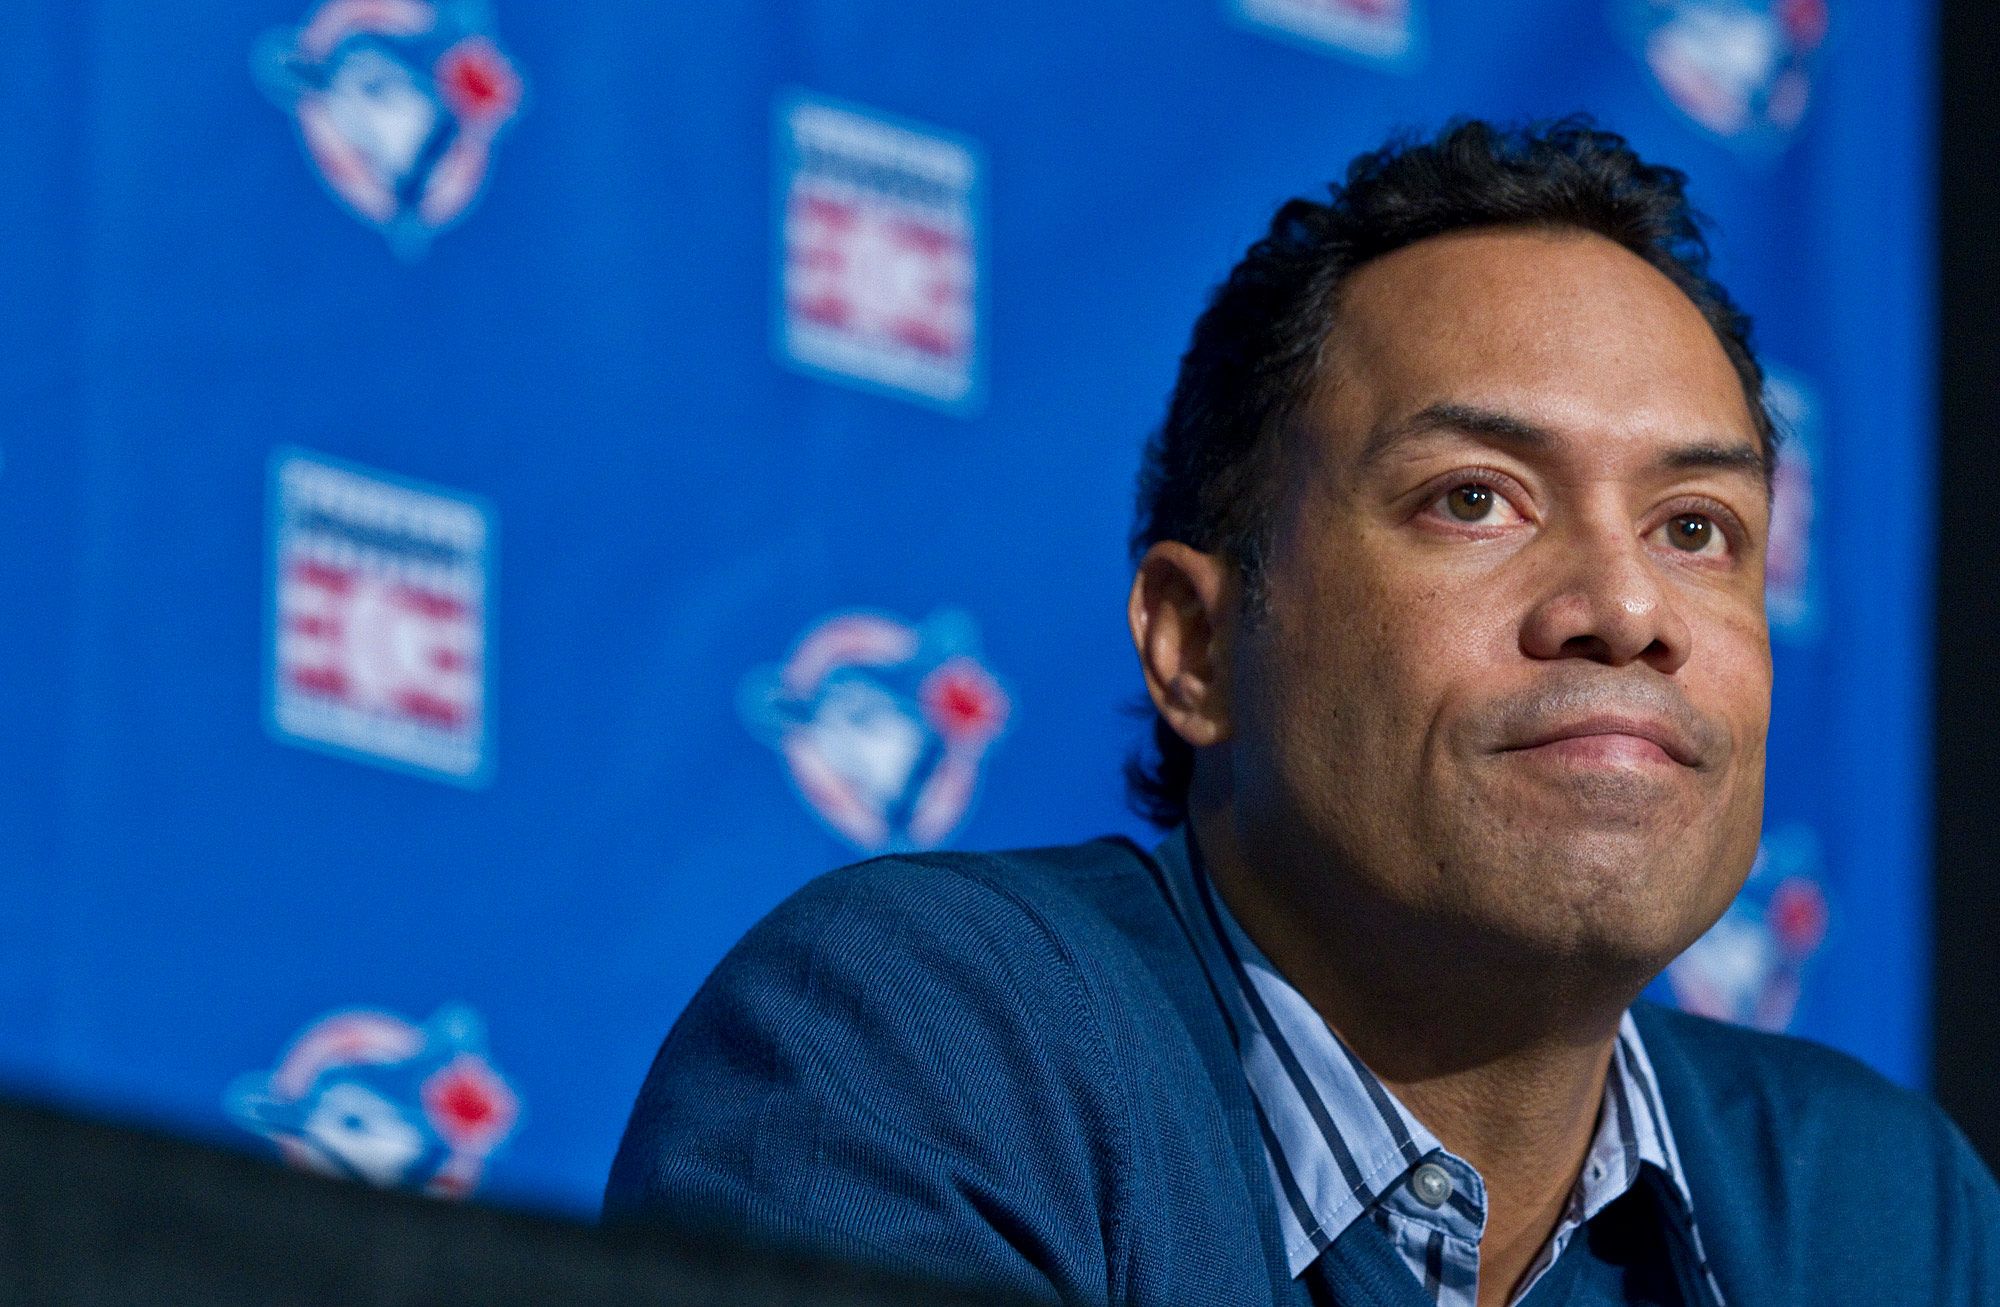 Hall of Famer Roberto Alomar banned from MLB after sexual